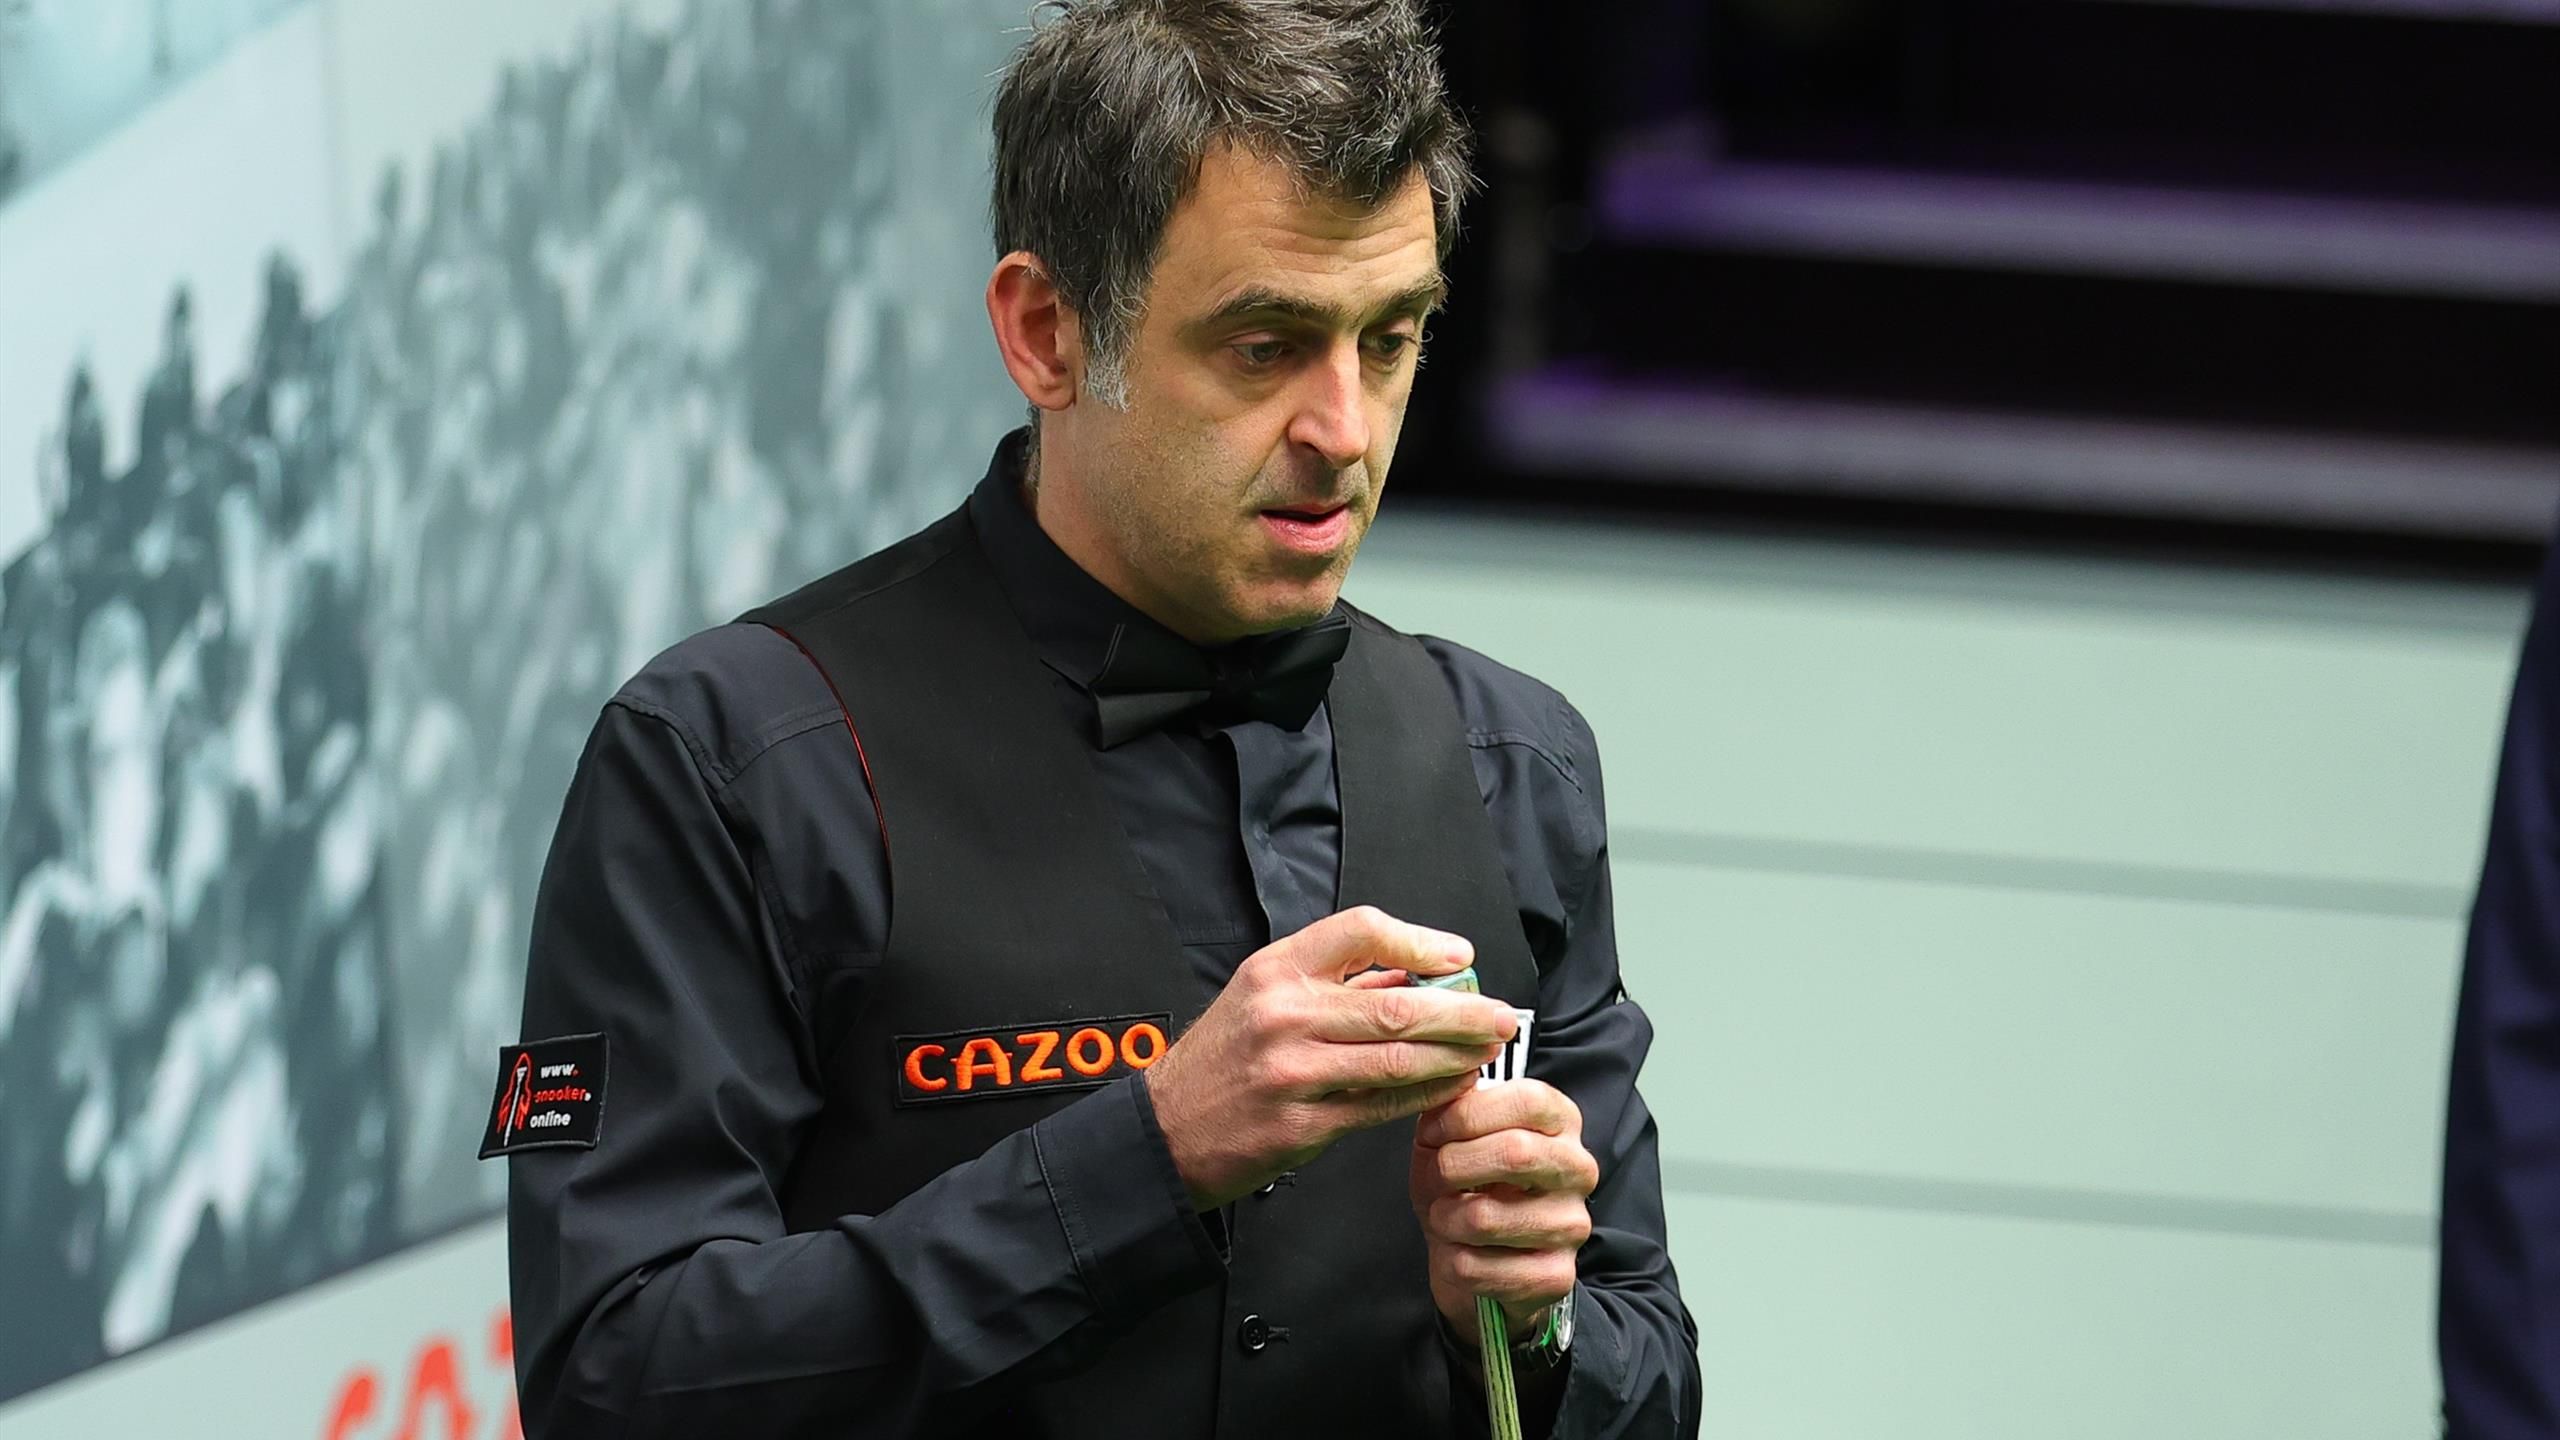 World Snooker Championship 2023 LIVE - Ronnie OSullivan back in action, John Higgins and Mark Selby level